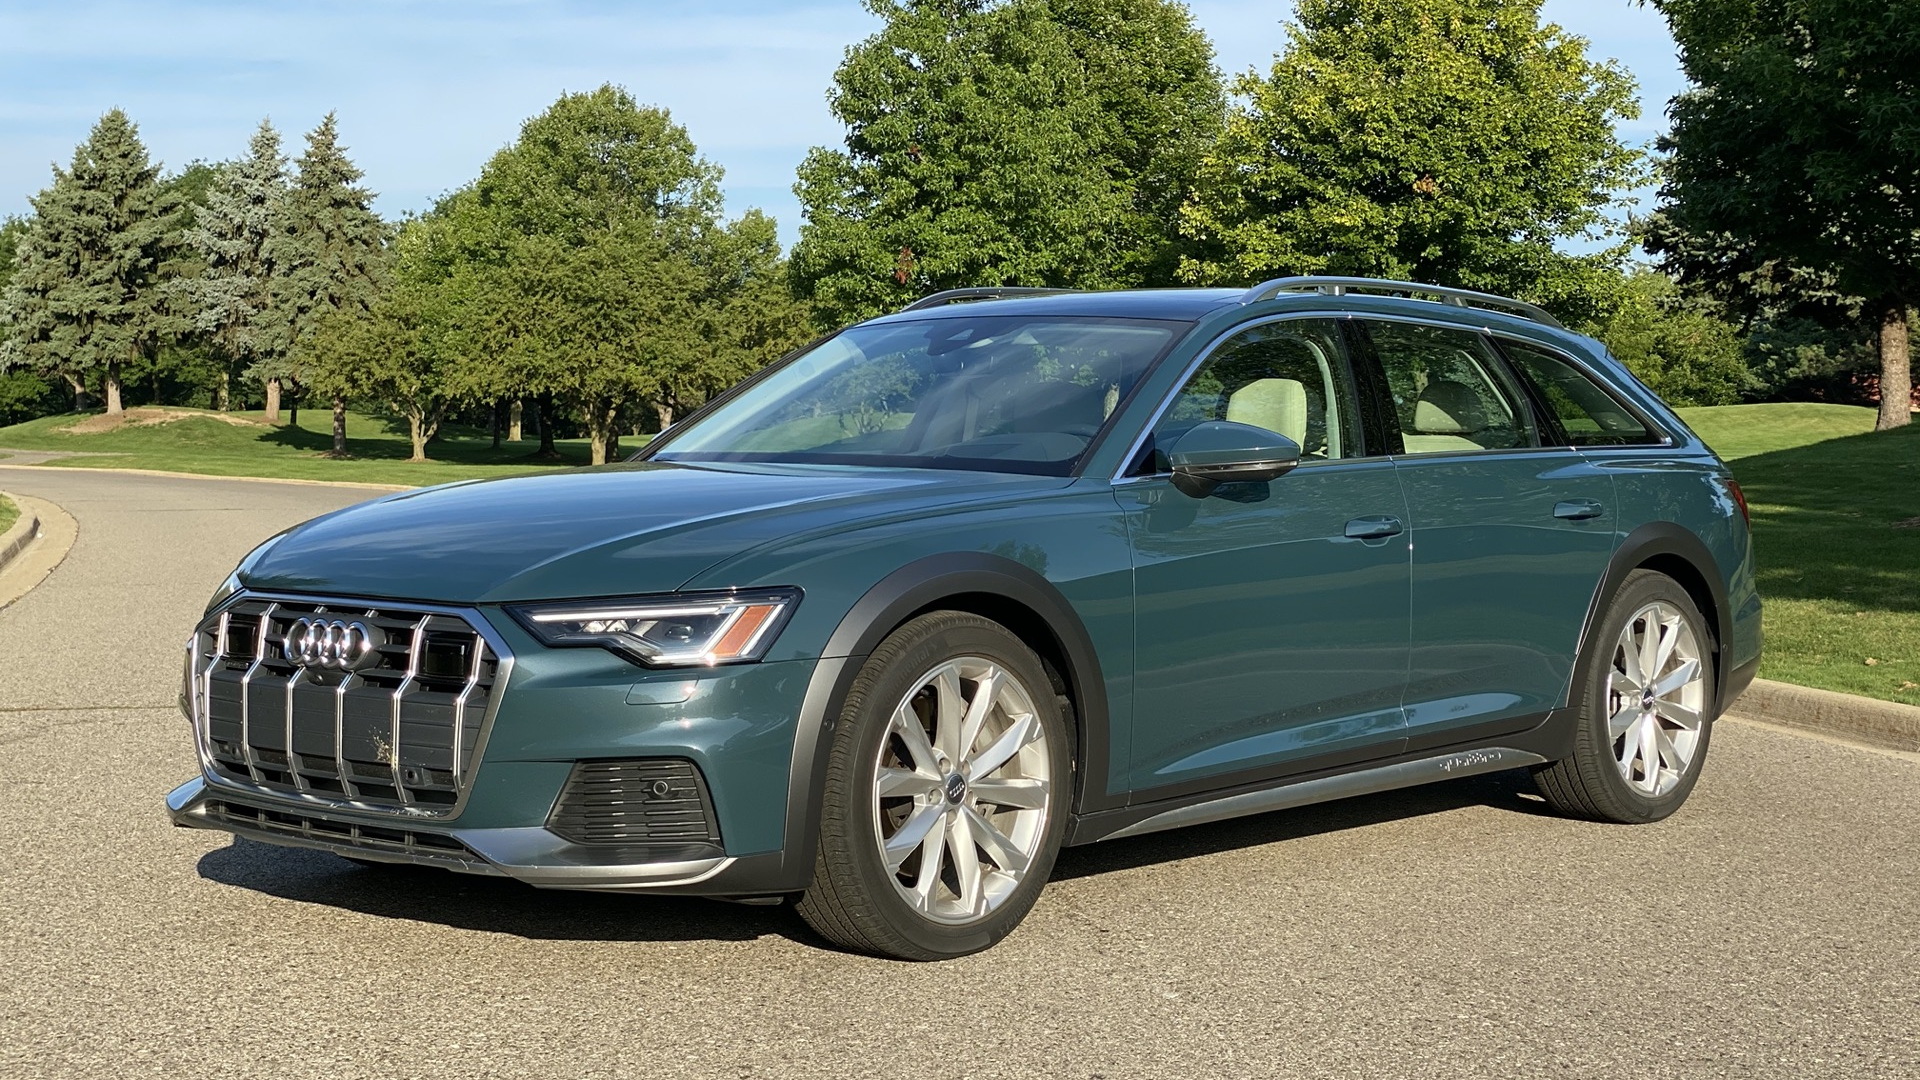 2020 Audi A6 Allroad Quattro Test: This Car Makes It Easy to Catch